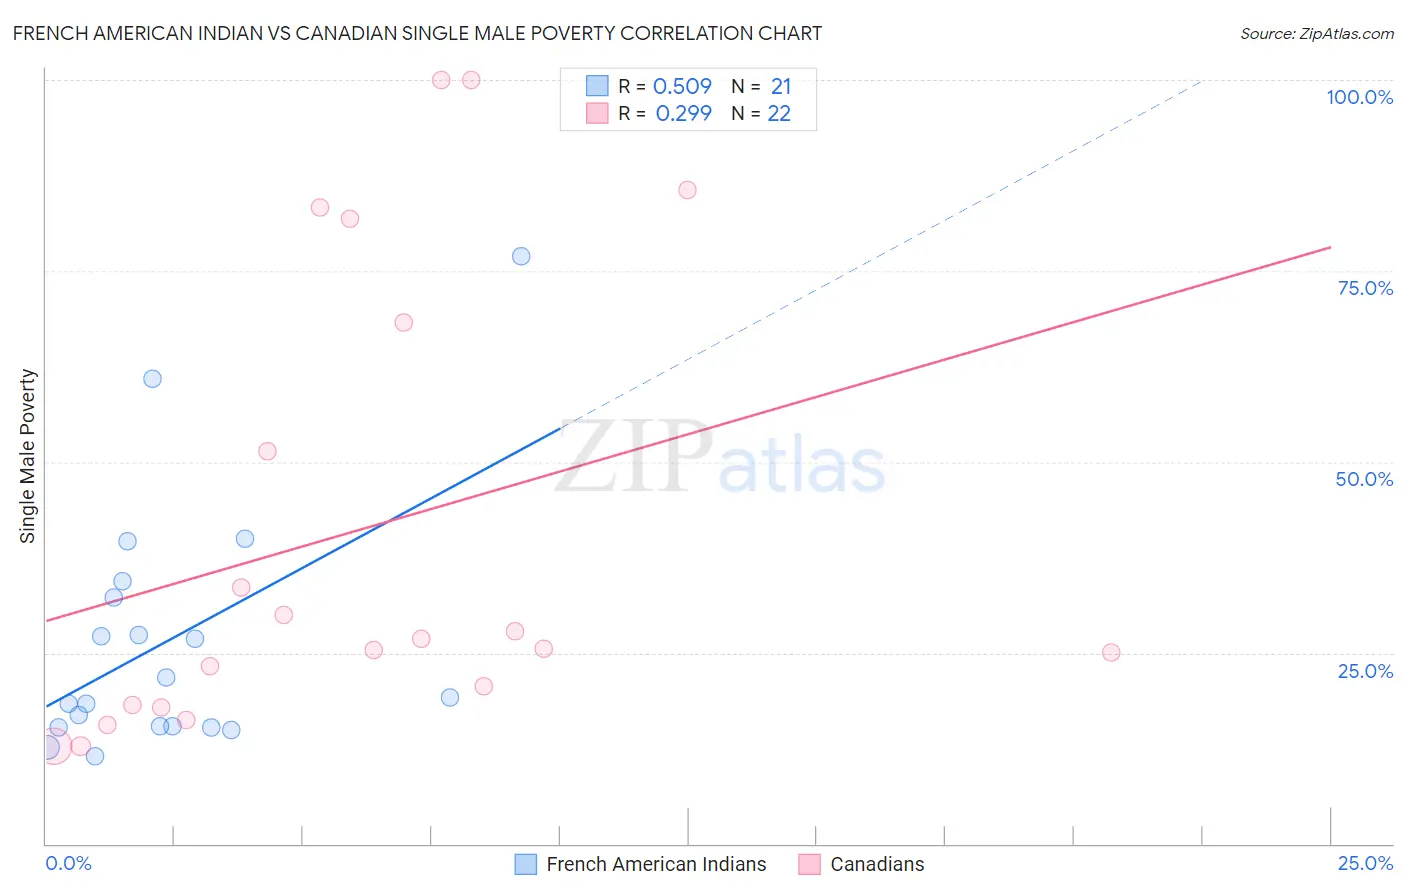 French American Indian vs Canadian Single Male Poverty